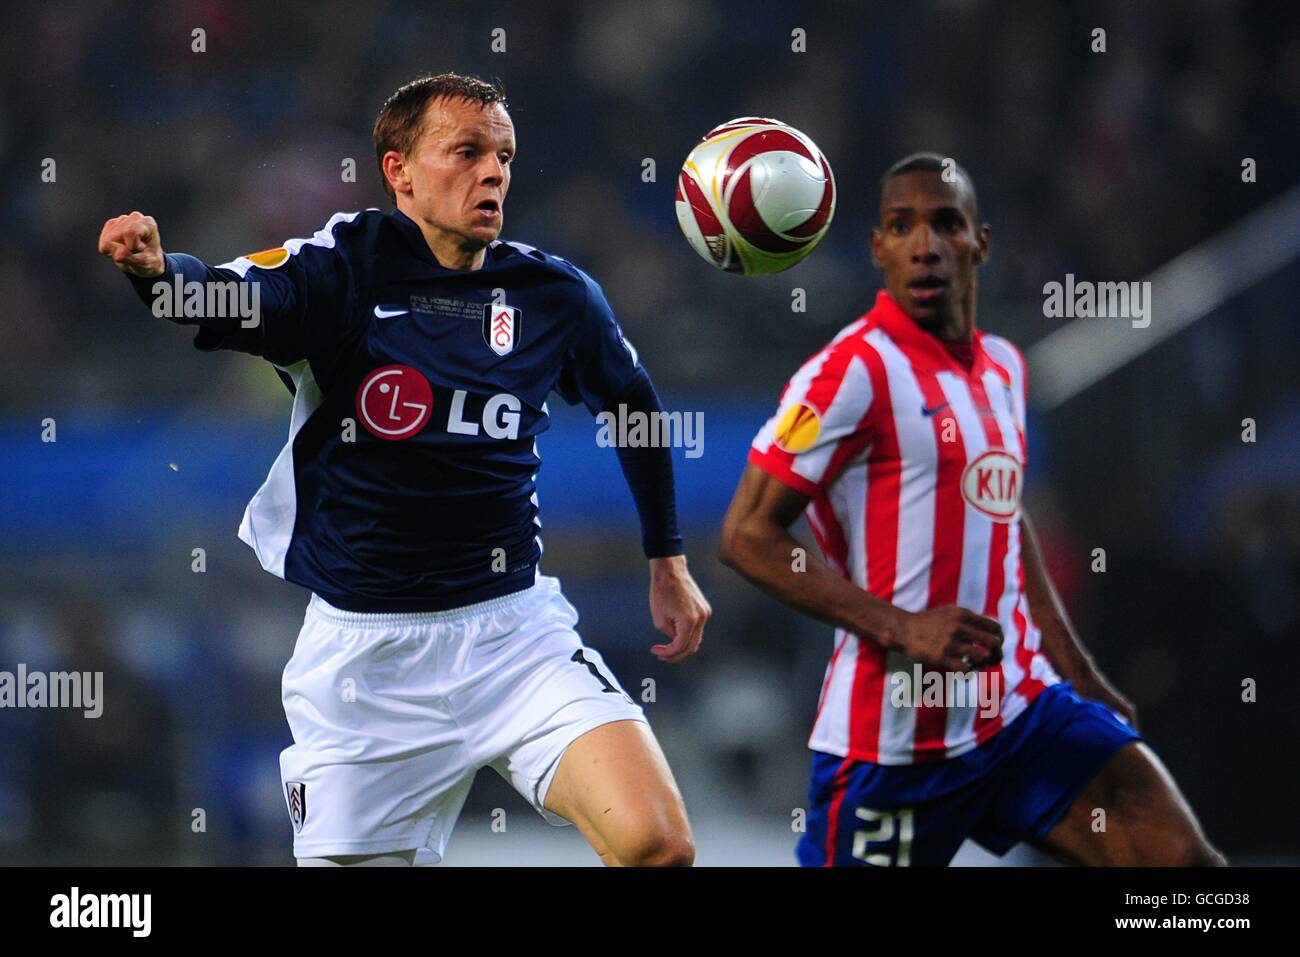 Atletico Madrid's Luis Amaranto Perea (right) and Fulham's Erik Nevland (left) battle for the ball Stock Photo